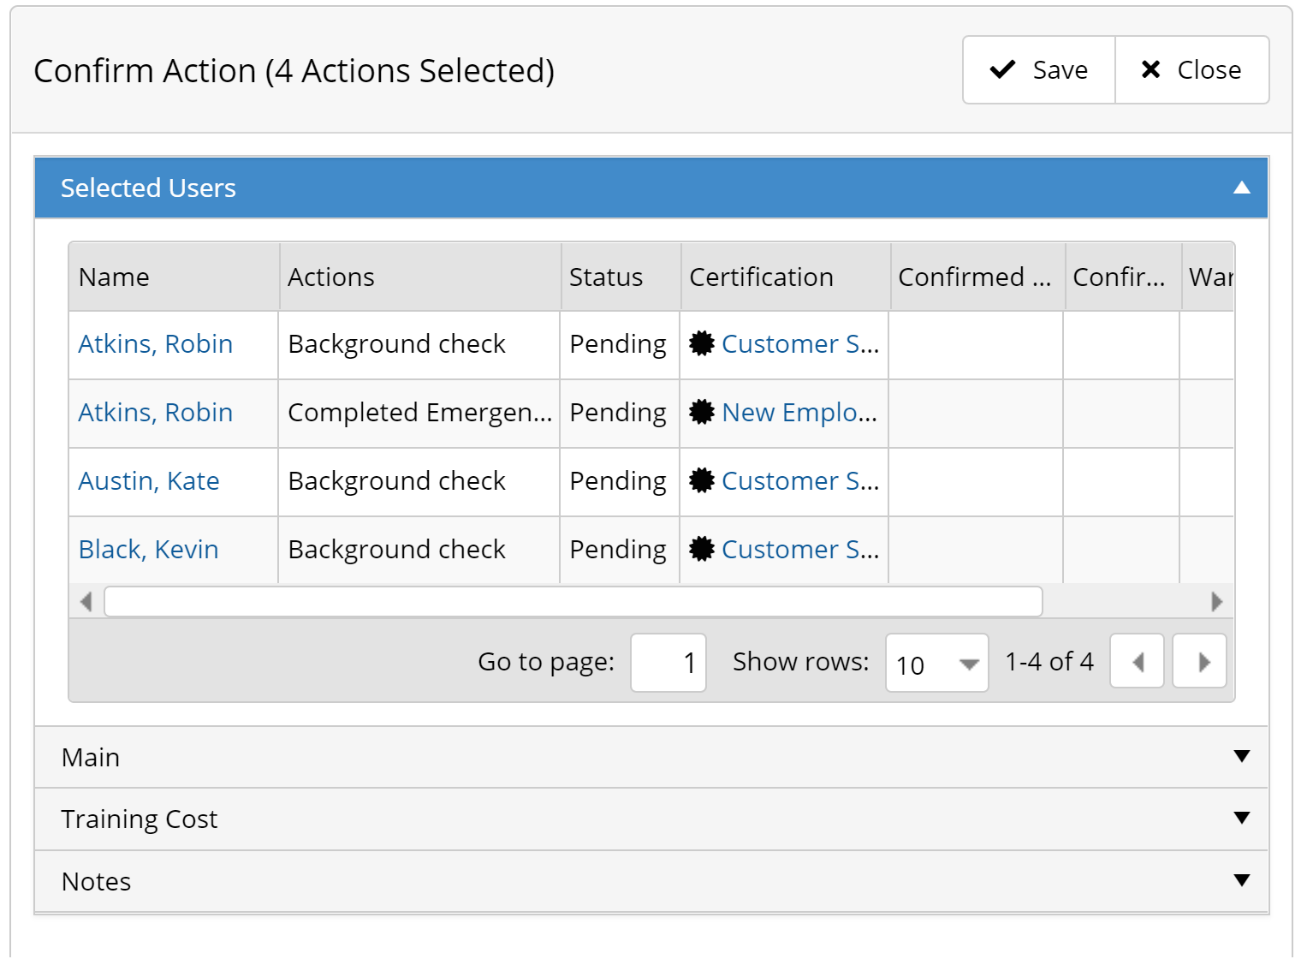 Confirm Action for multiple users